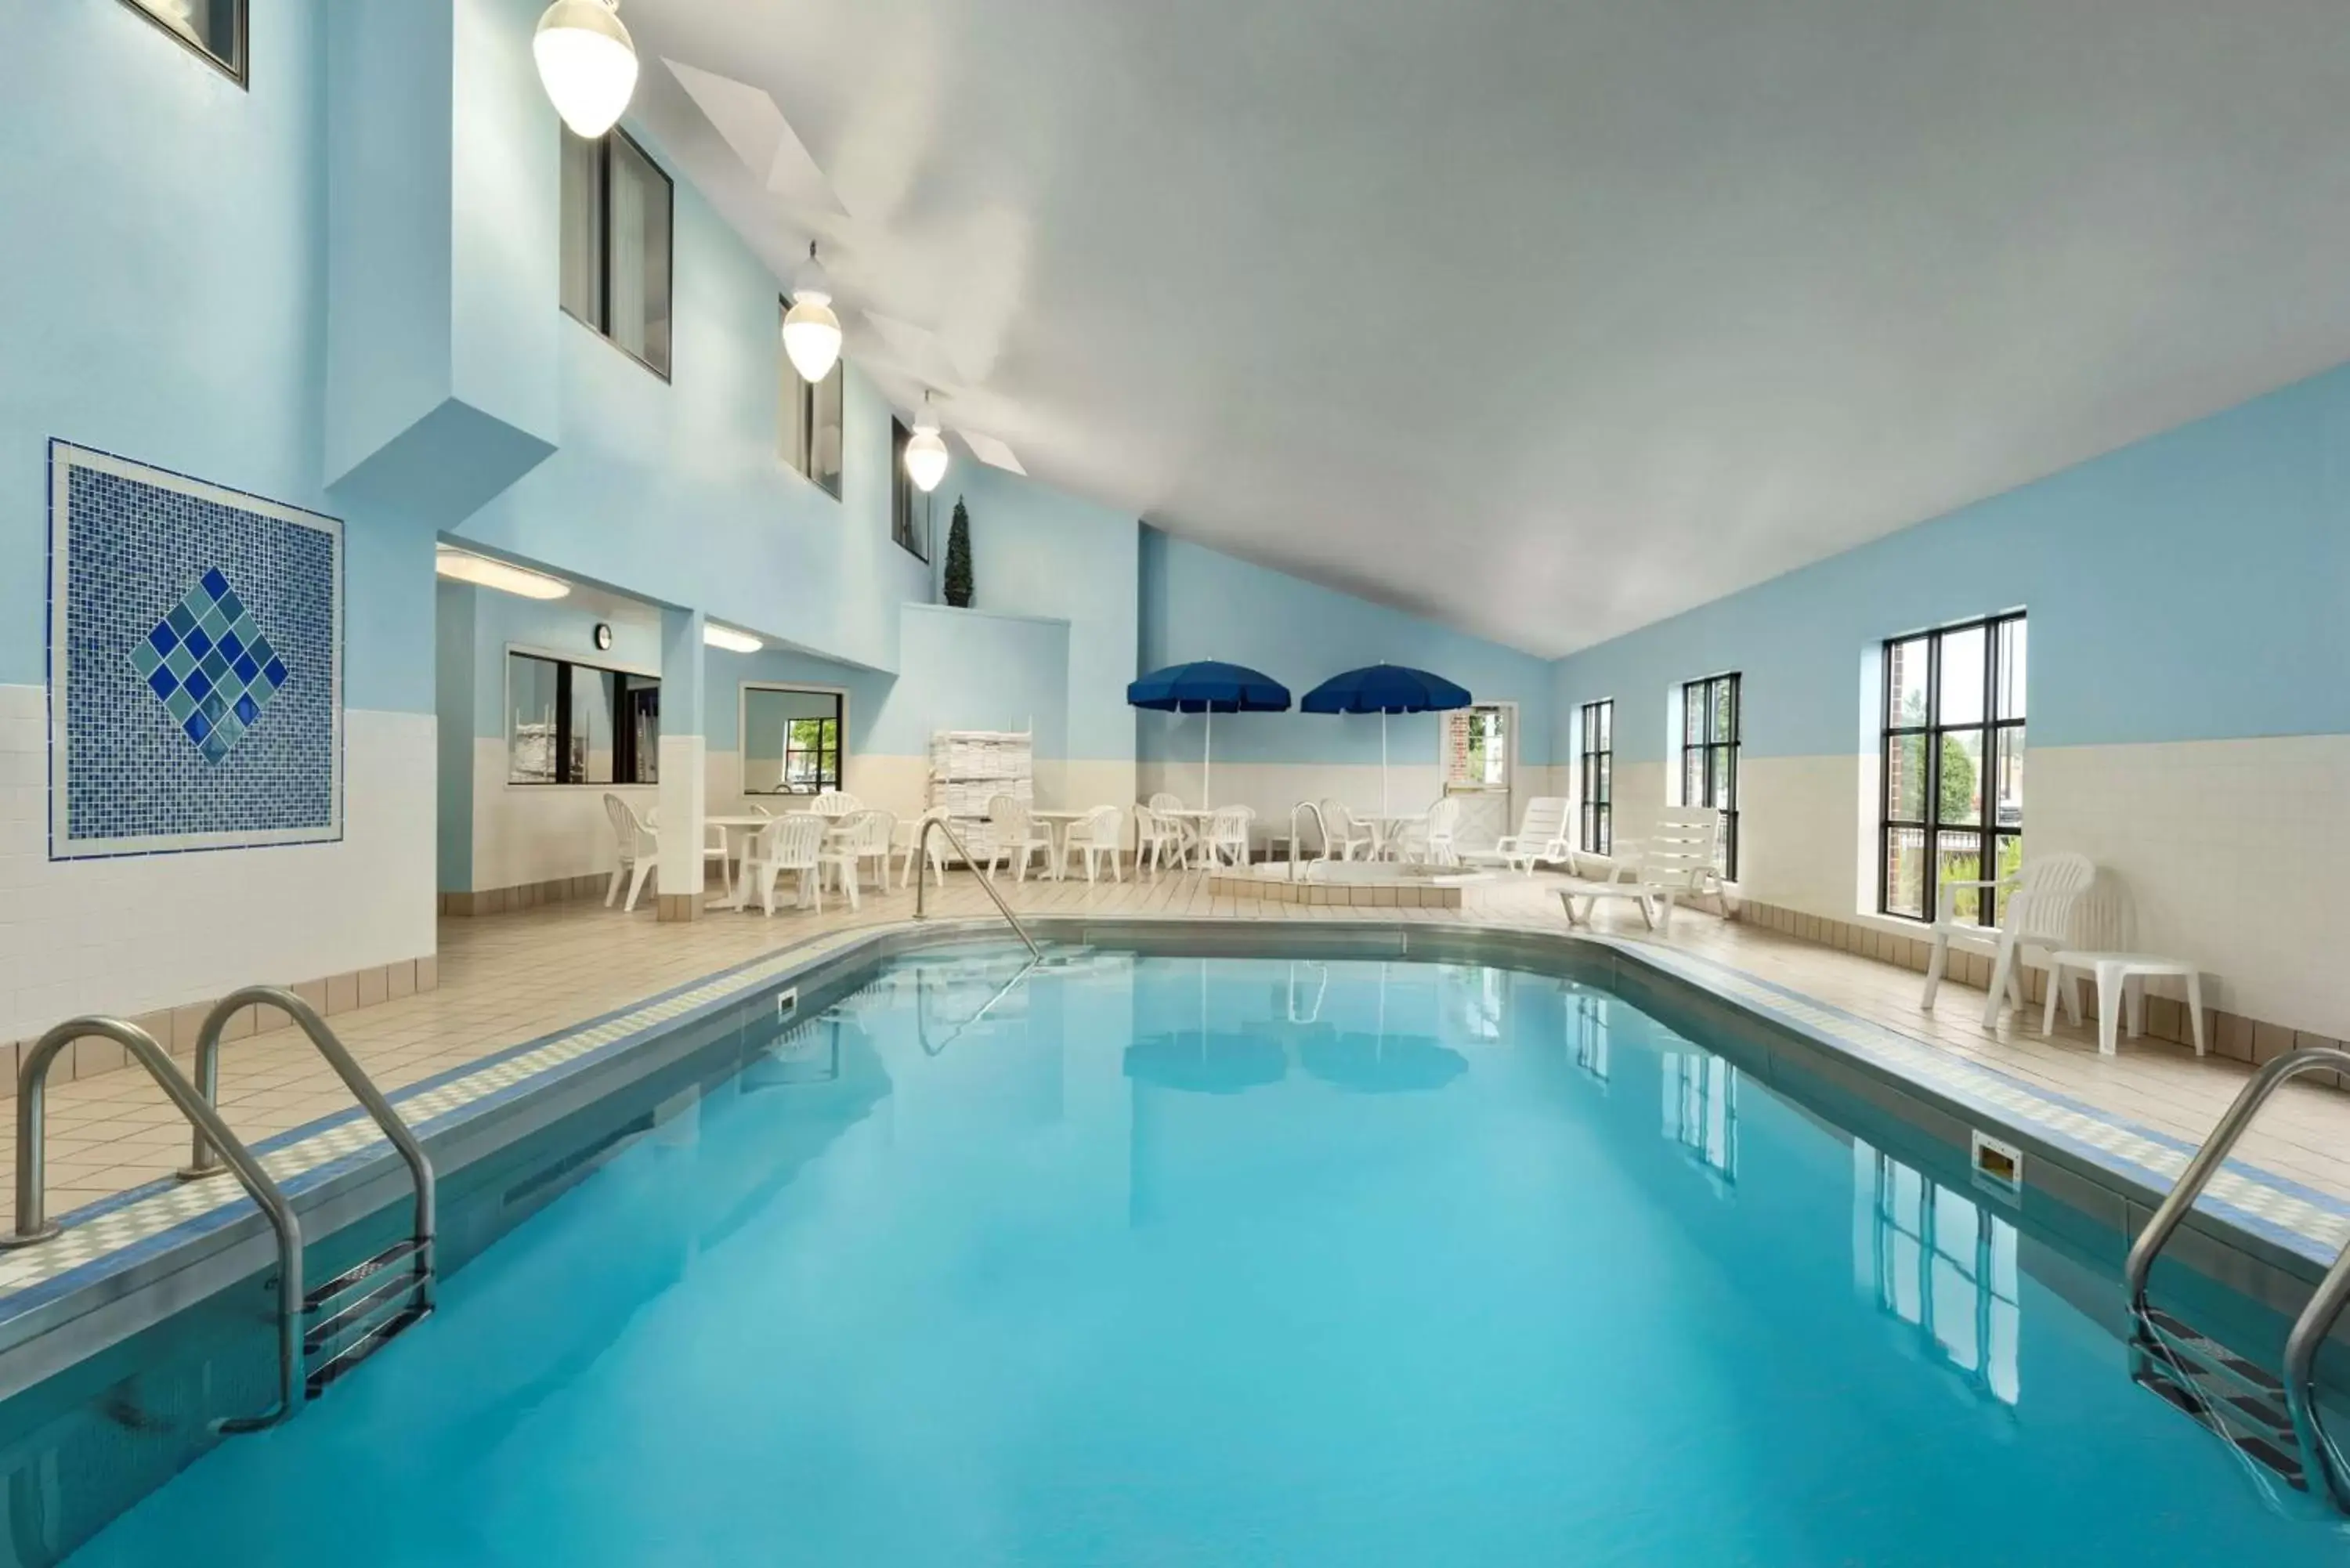 On site, Swimming Pool in Country Inn & Suites by Radisson, Fargo, ND